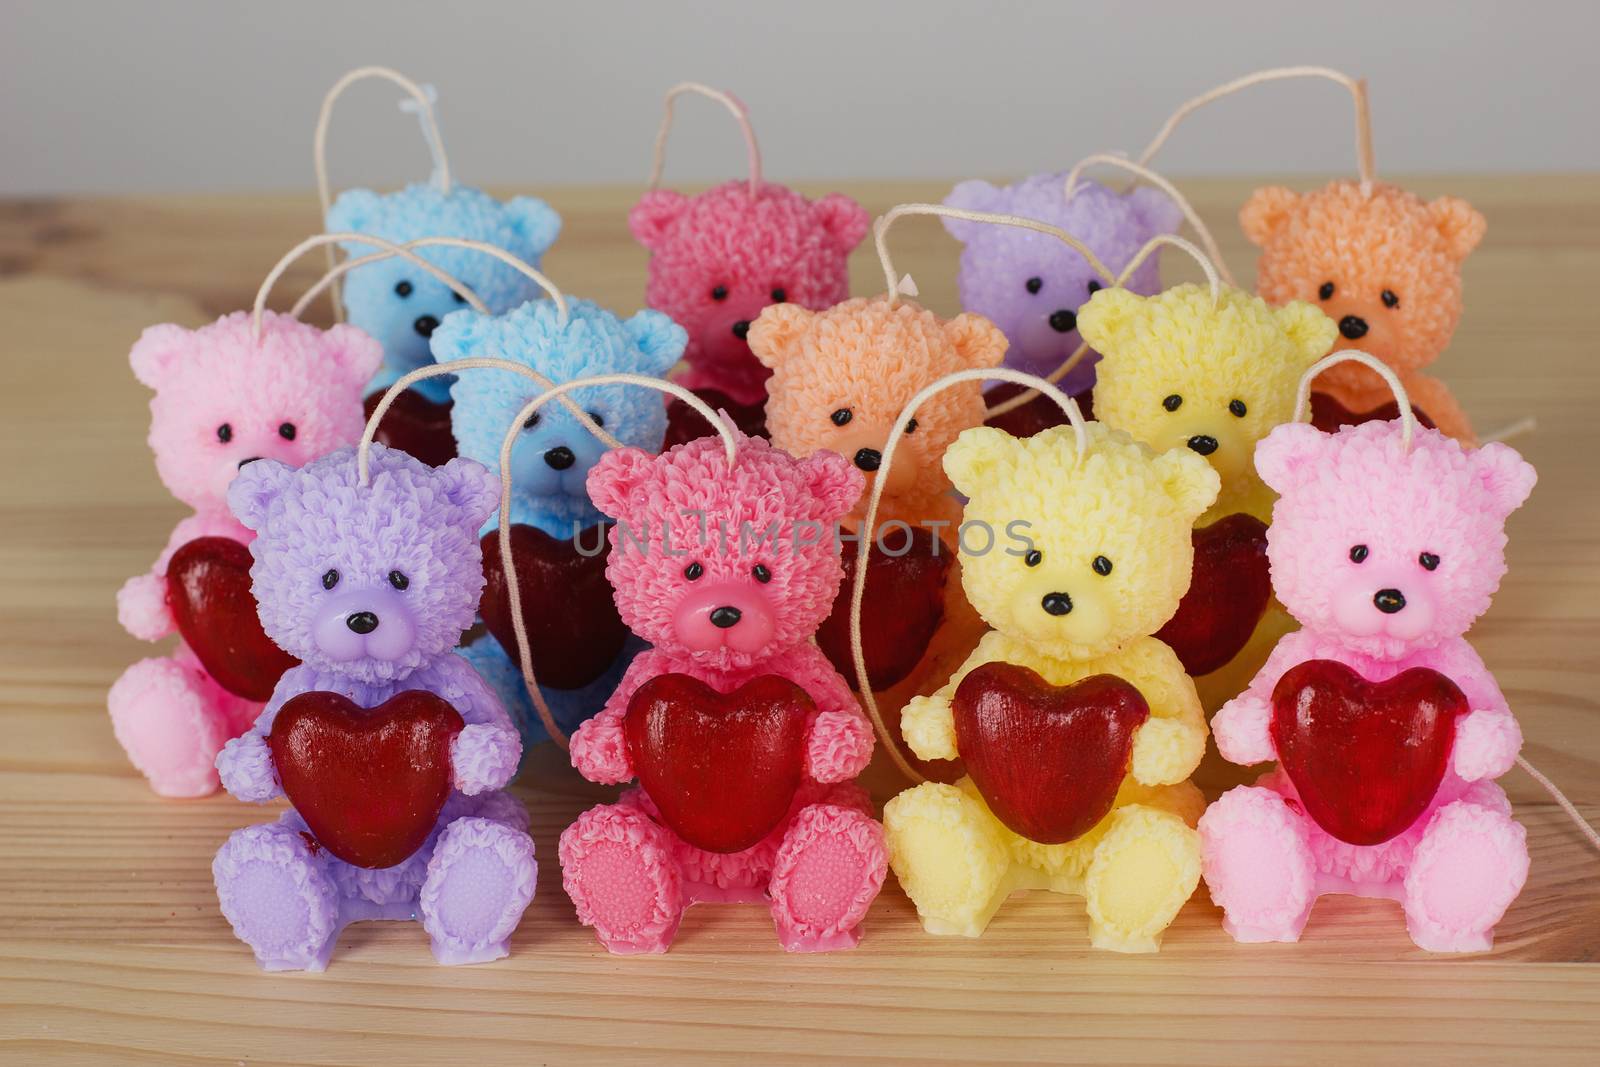 Funny Souvenir gift candles in the shape of teddy-bear with red by natazhekova